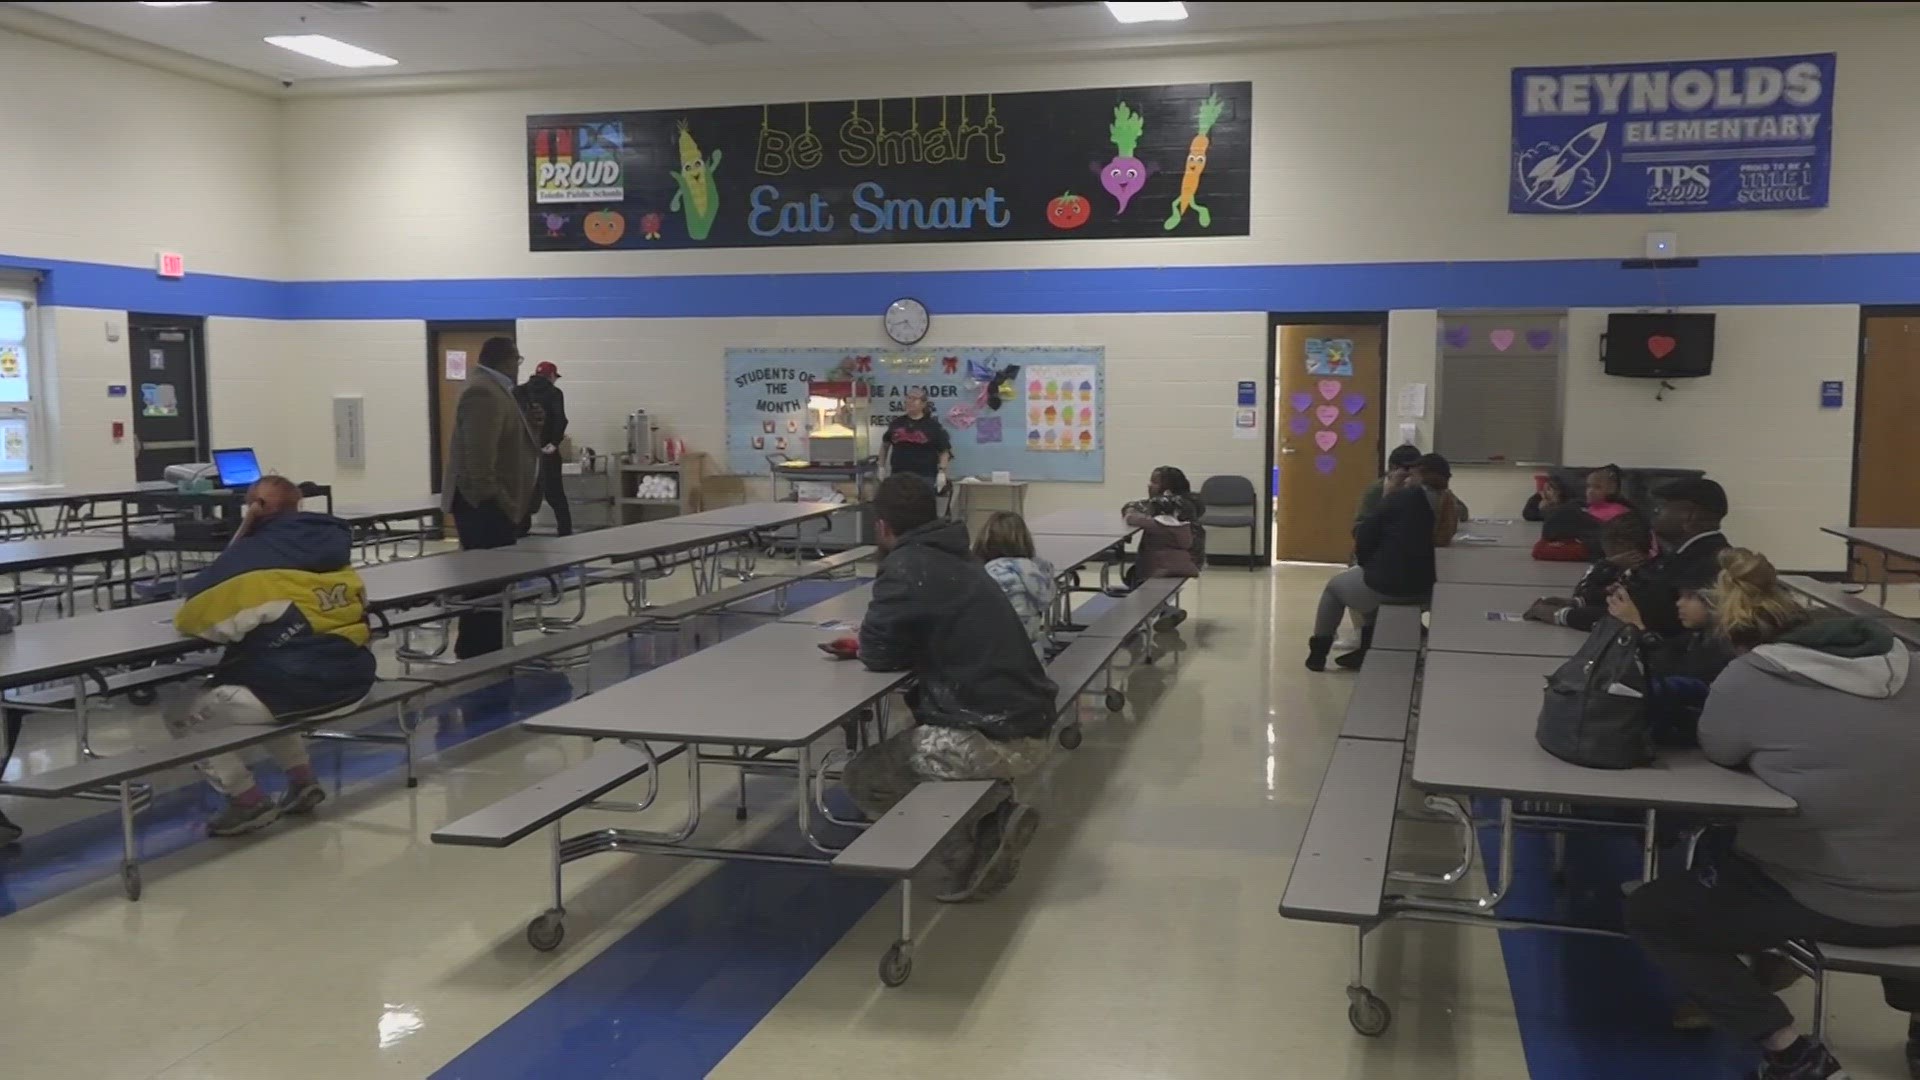 Reynolds Elementary School is offering incentives that include a catered lunch and a skating trip to the classes with the best attendance.